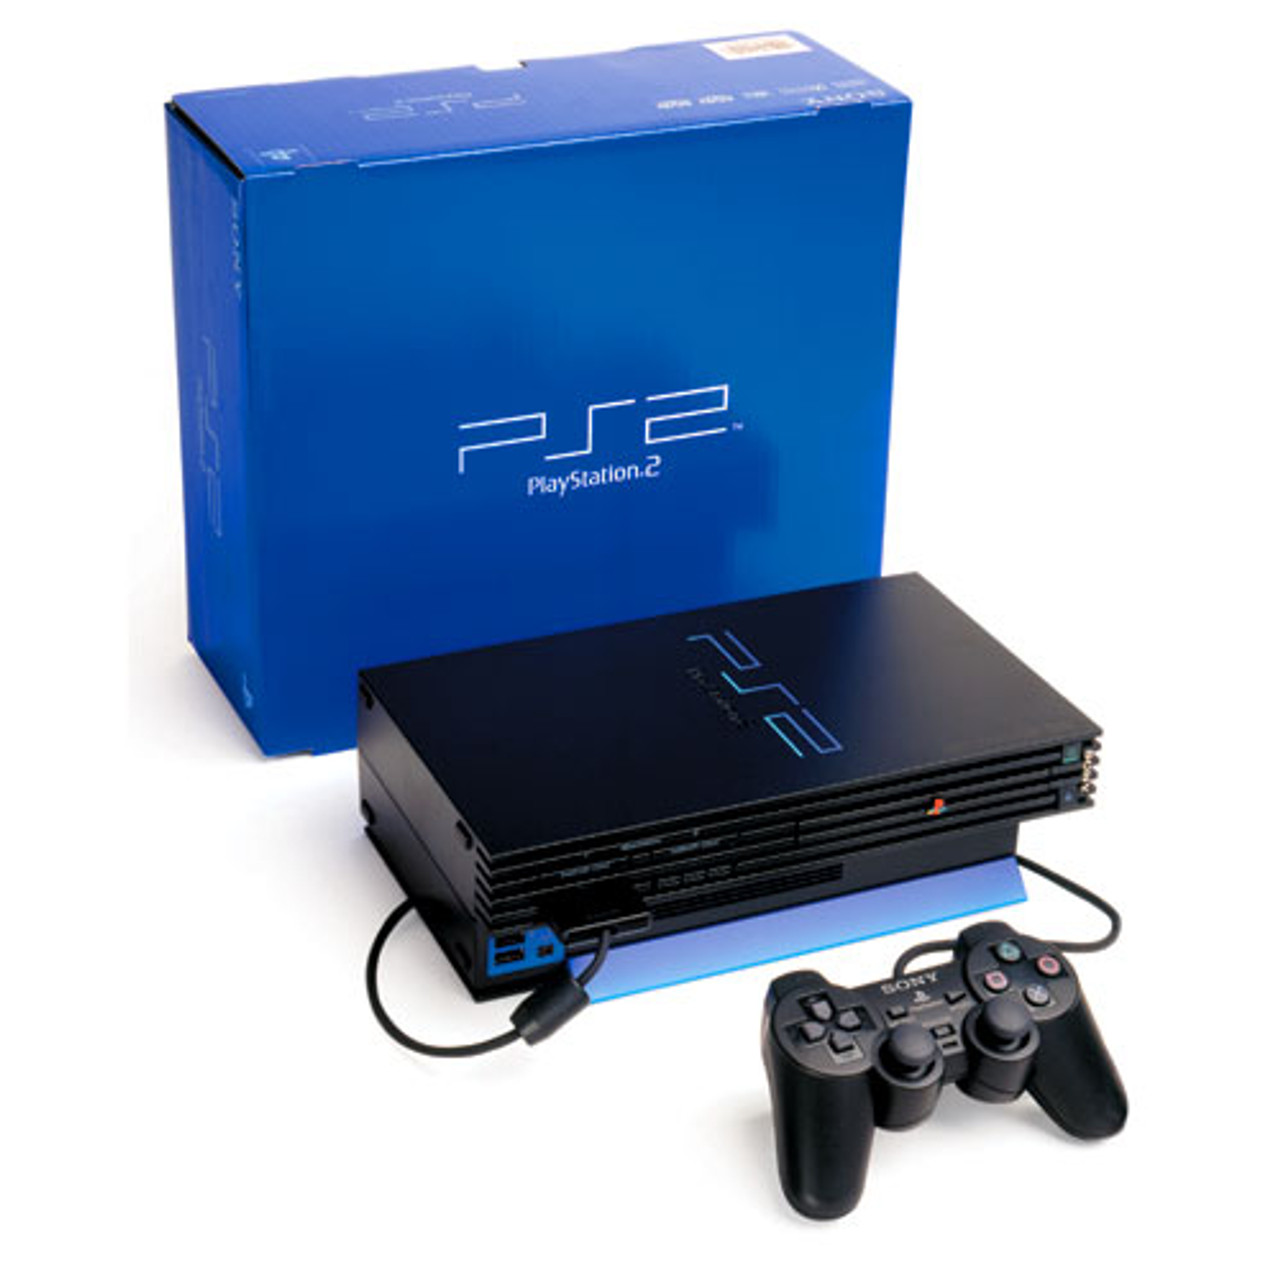 Playstation 2 Console In Original Box For Sale